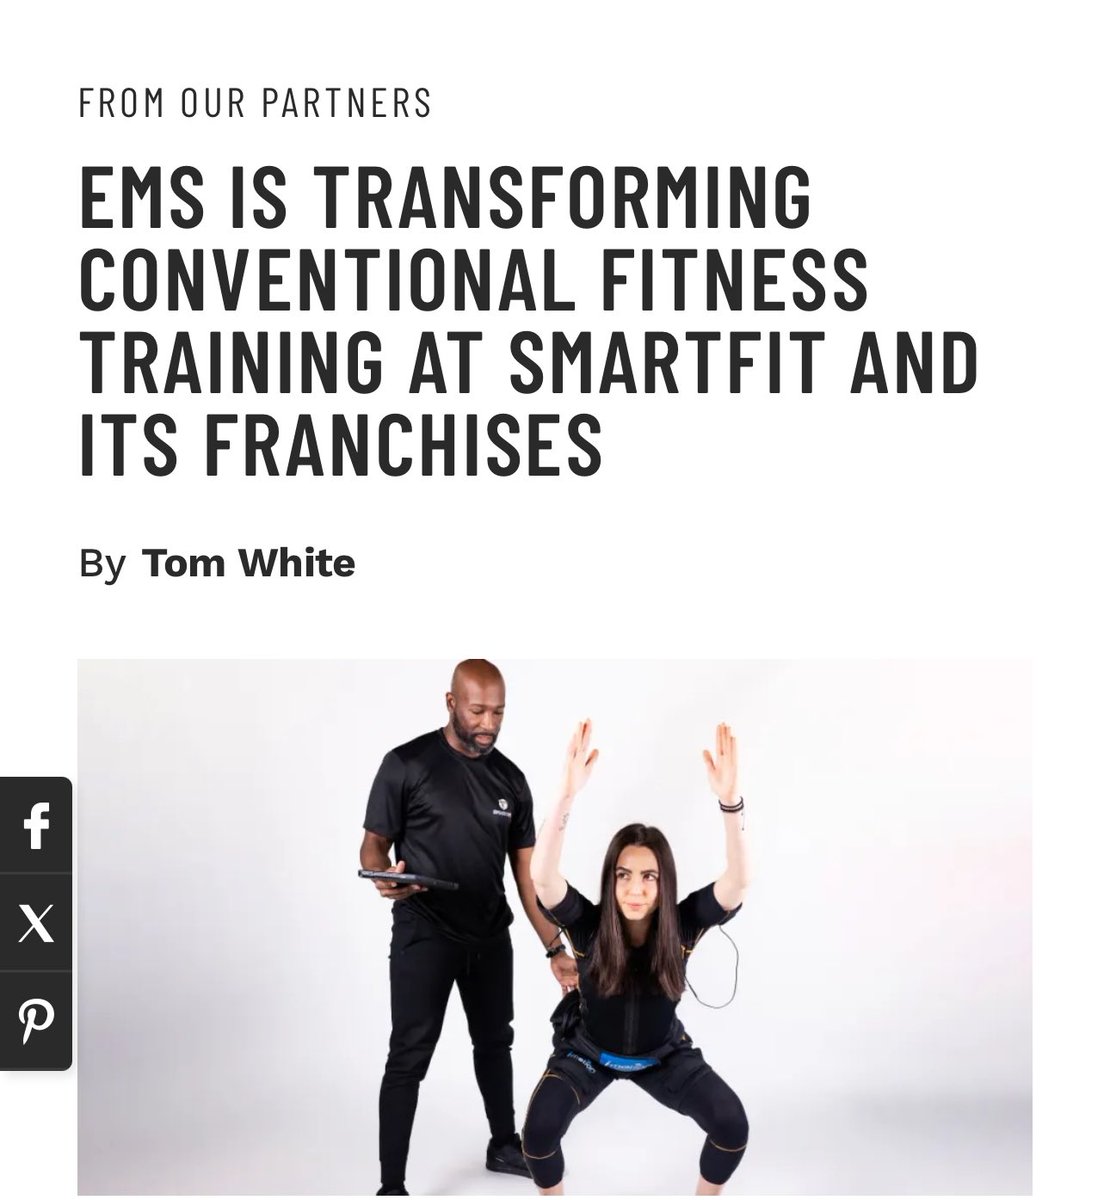 EMS IS TRANSFORMING CONVENTIONAL FITNESS TRAINING AT SMARTFIT AND ITS FRANCHISES By Tom White Read Article: muscleandfitness.com/features/from-…